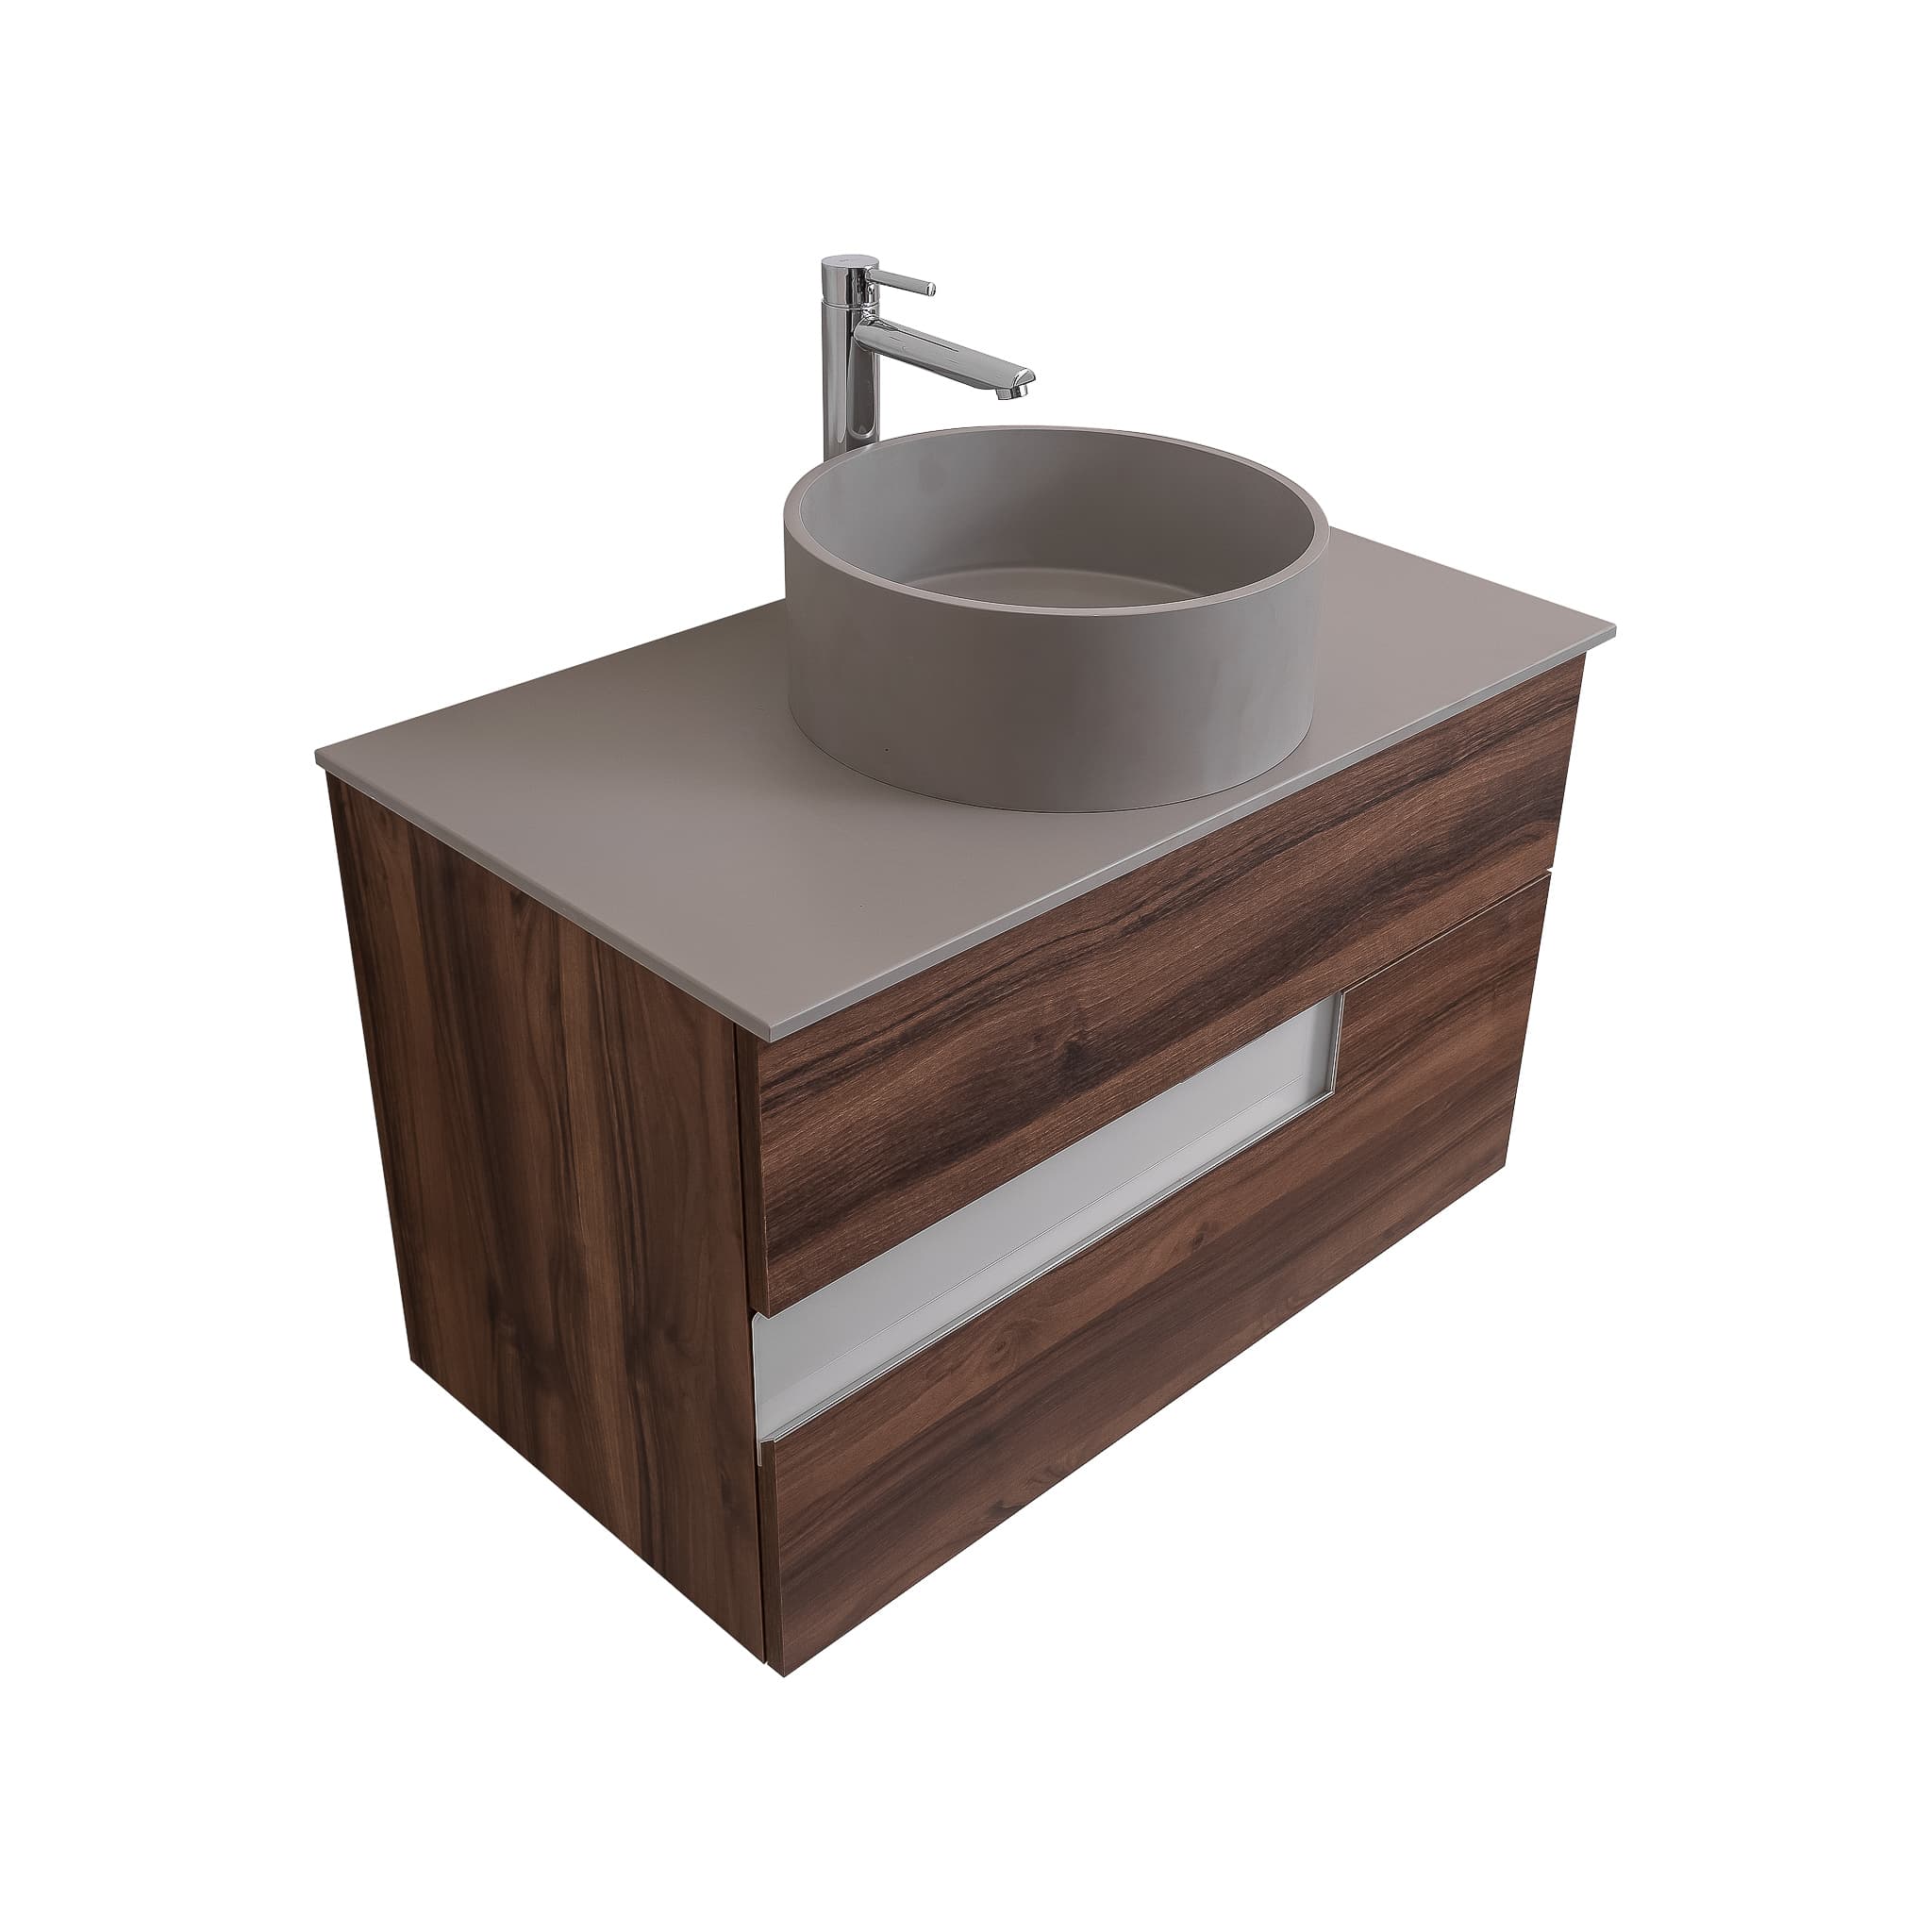 Vision 39.5 Valenti Medium Brown Wood Cabinet, Solid Surface Flat Grey Counter And Round Solid Surface Grey Basin 1386, Wall Mounted Modern Vanity Set